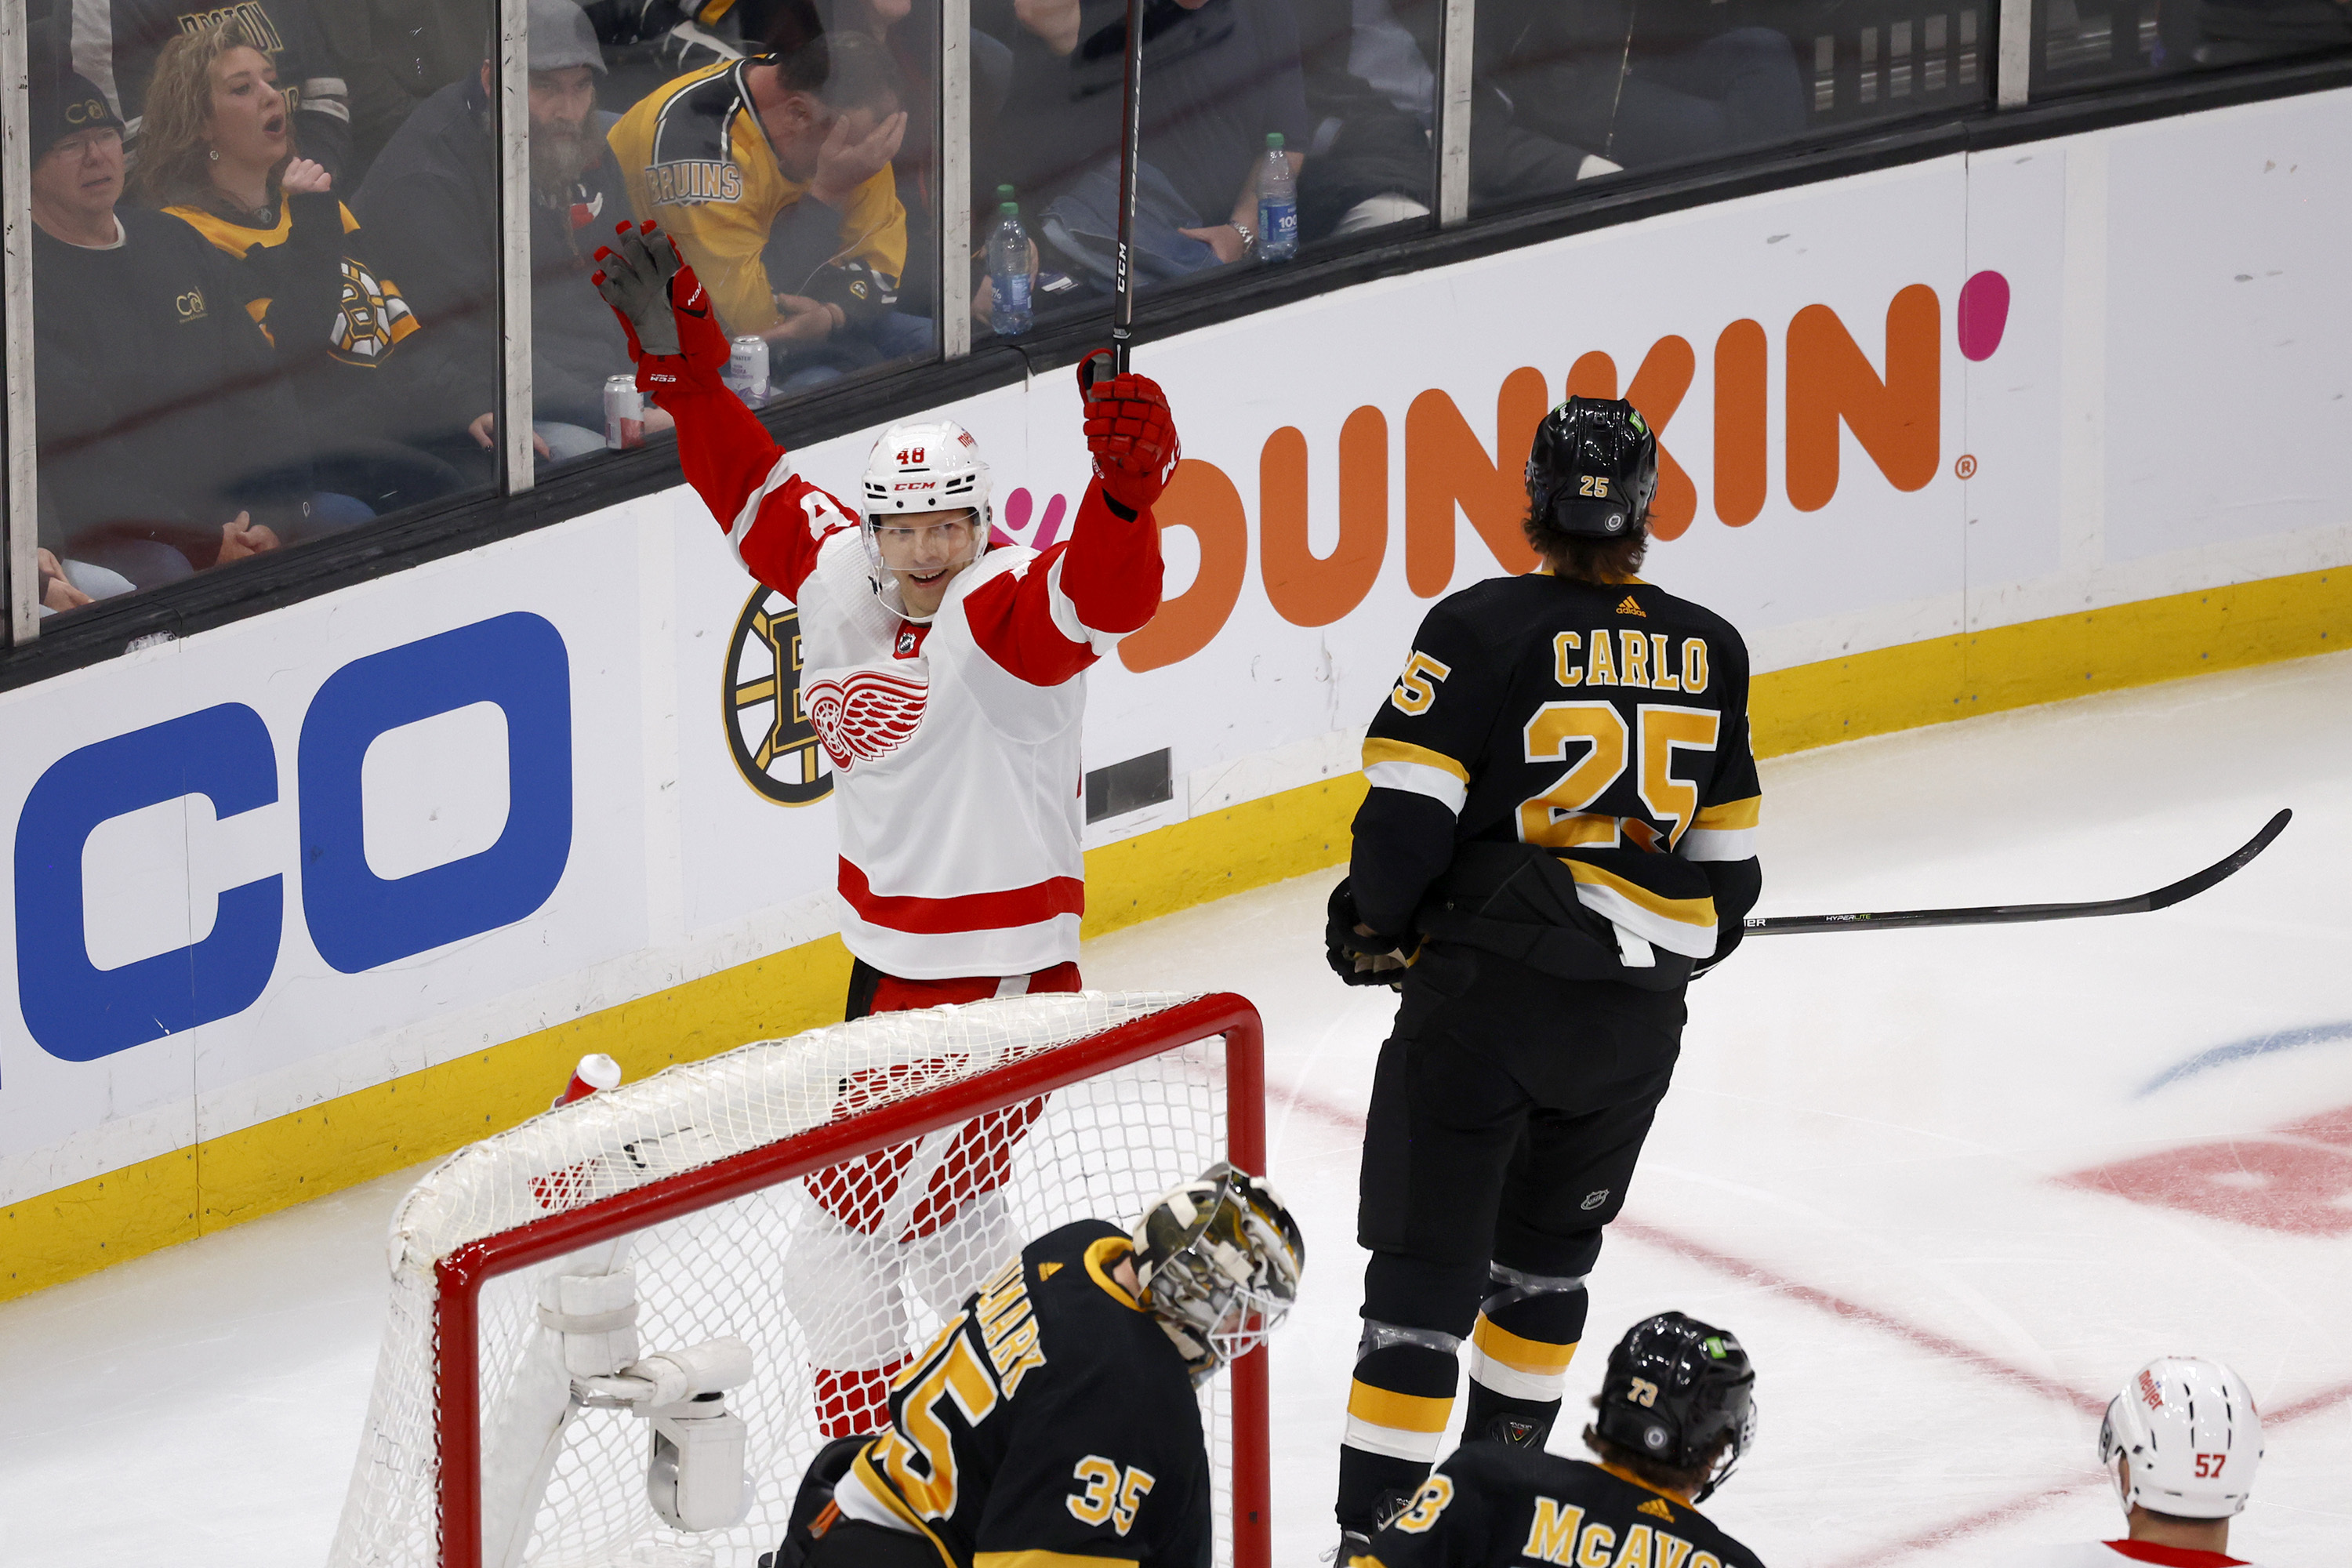 Bruins clinch playoff spot, set record for fastest to 50 wins